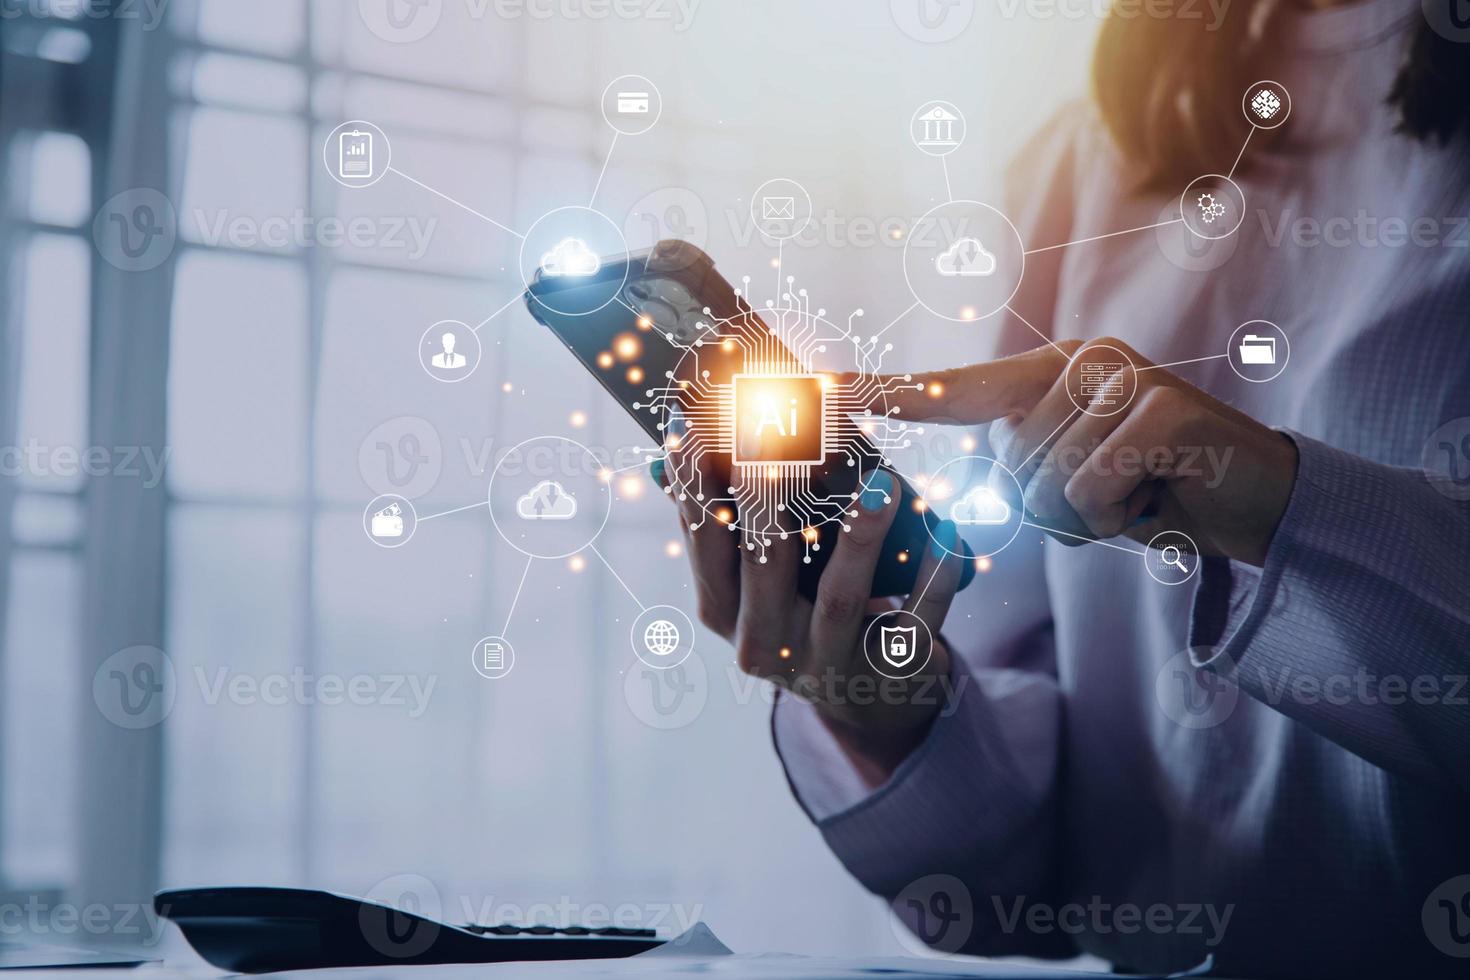 Digital transformation technology strategy, IoT, internet of things. transformation of ideas and the adoption of technology in business in the digital age, enhancing global business capabilities. Ai photo